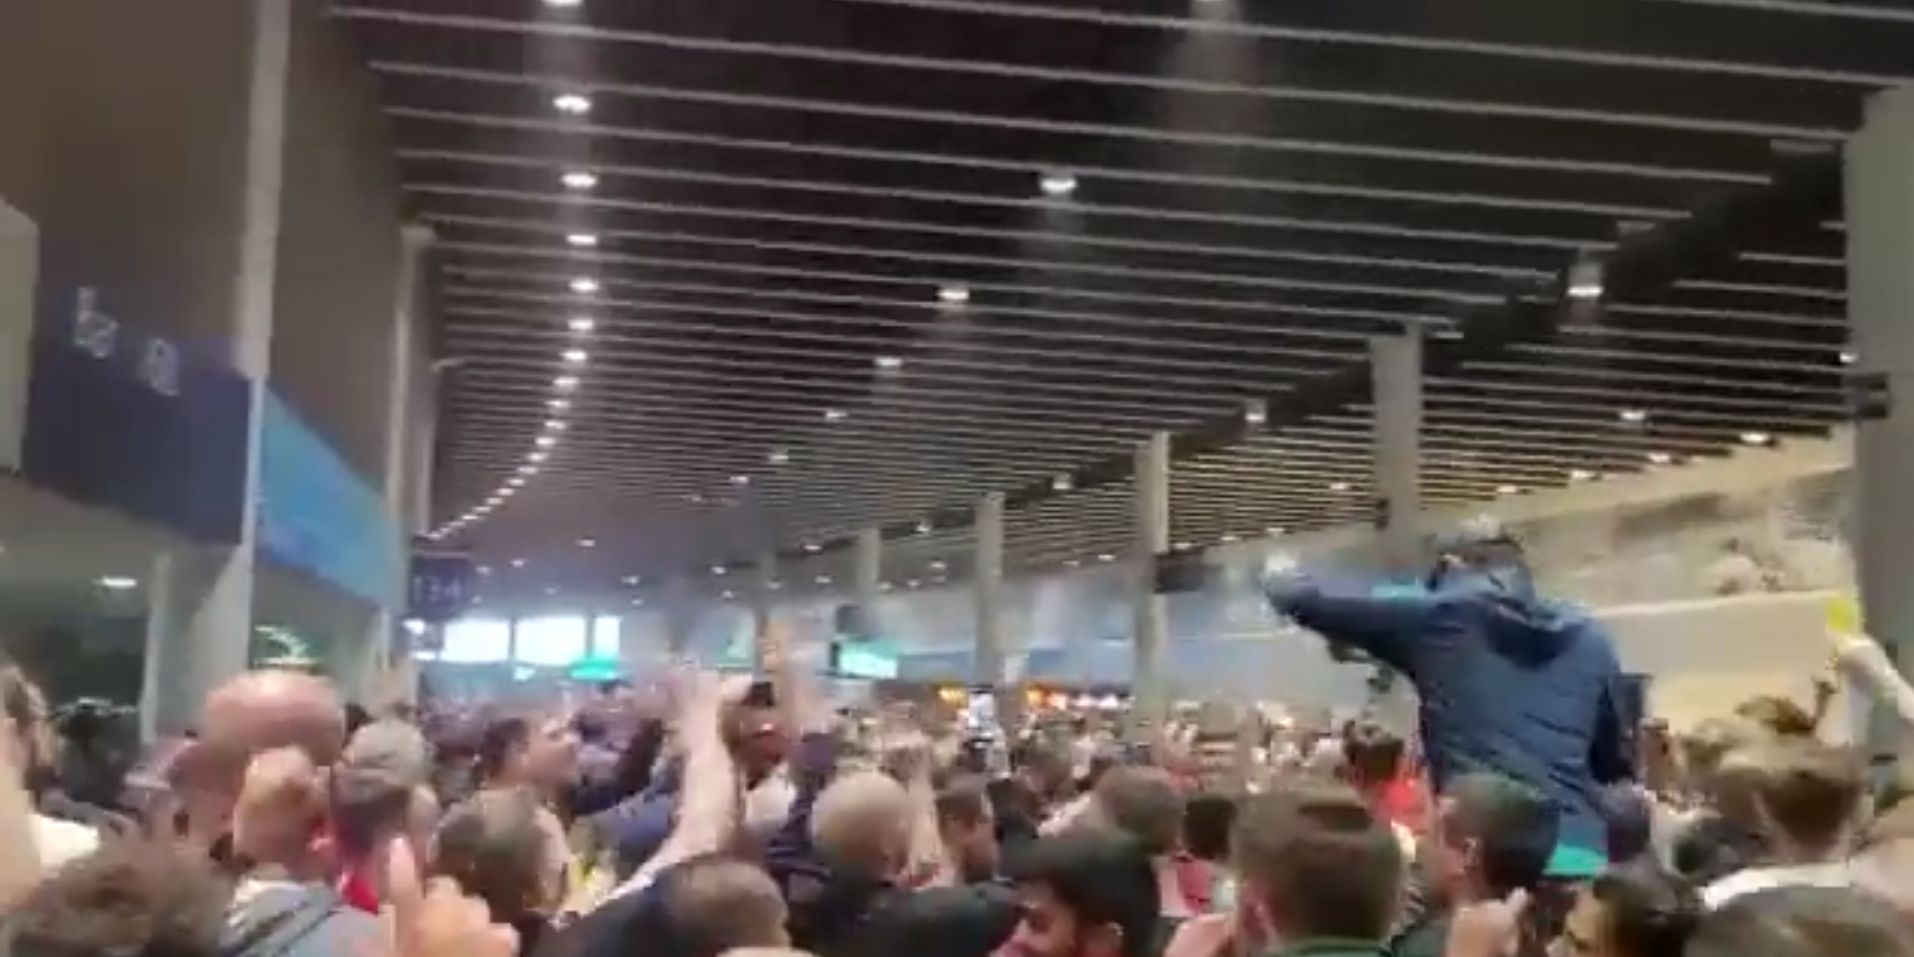 (Video) Liverpool fans go wild inside Wembley concourse after scoring three goals against Manchester City